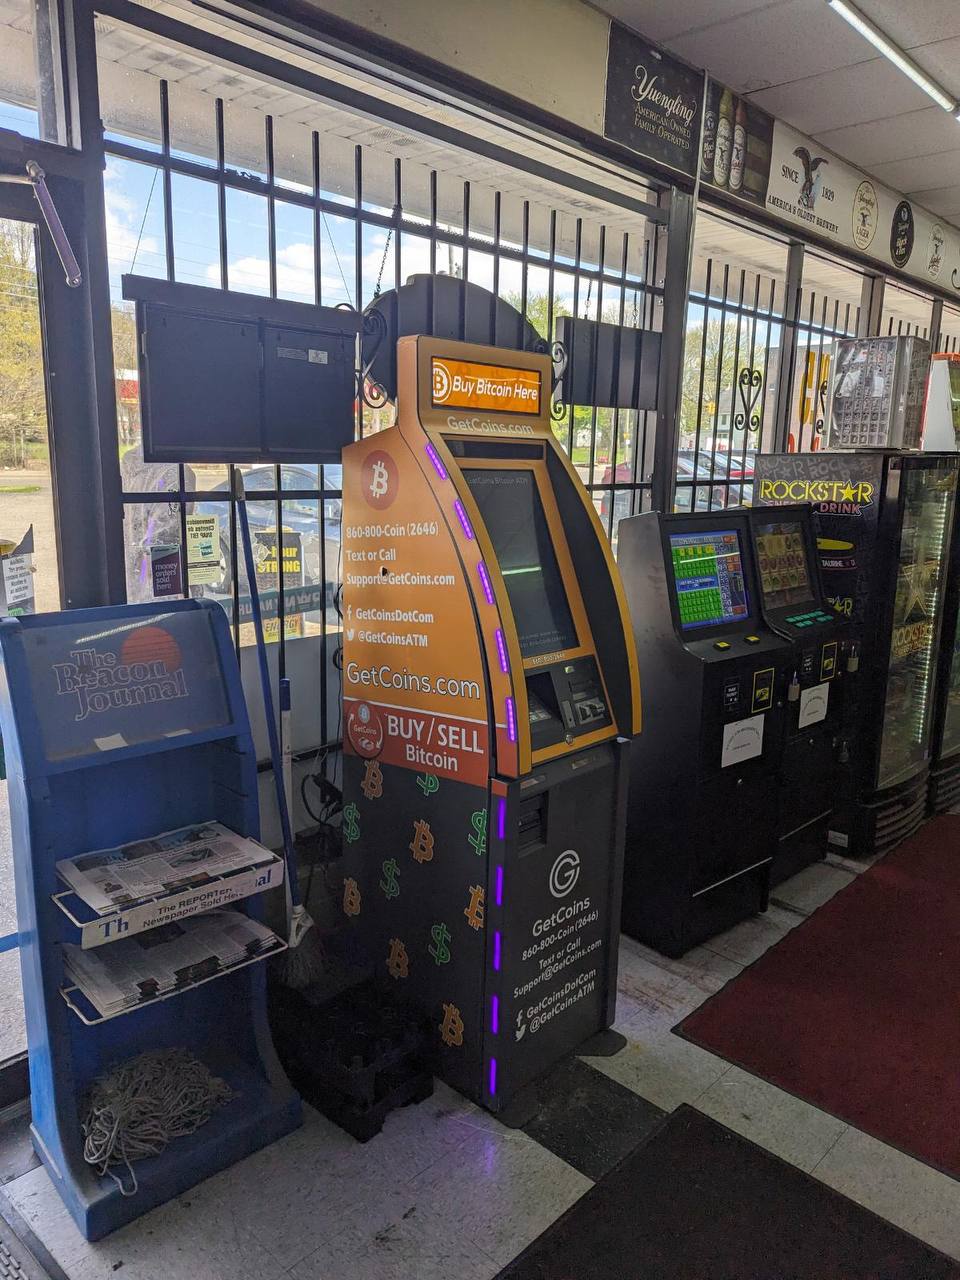 Getcoins - Bitcoin ATM - Inside of Sunrise Convenience Food Mart in Akron, Ohio